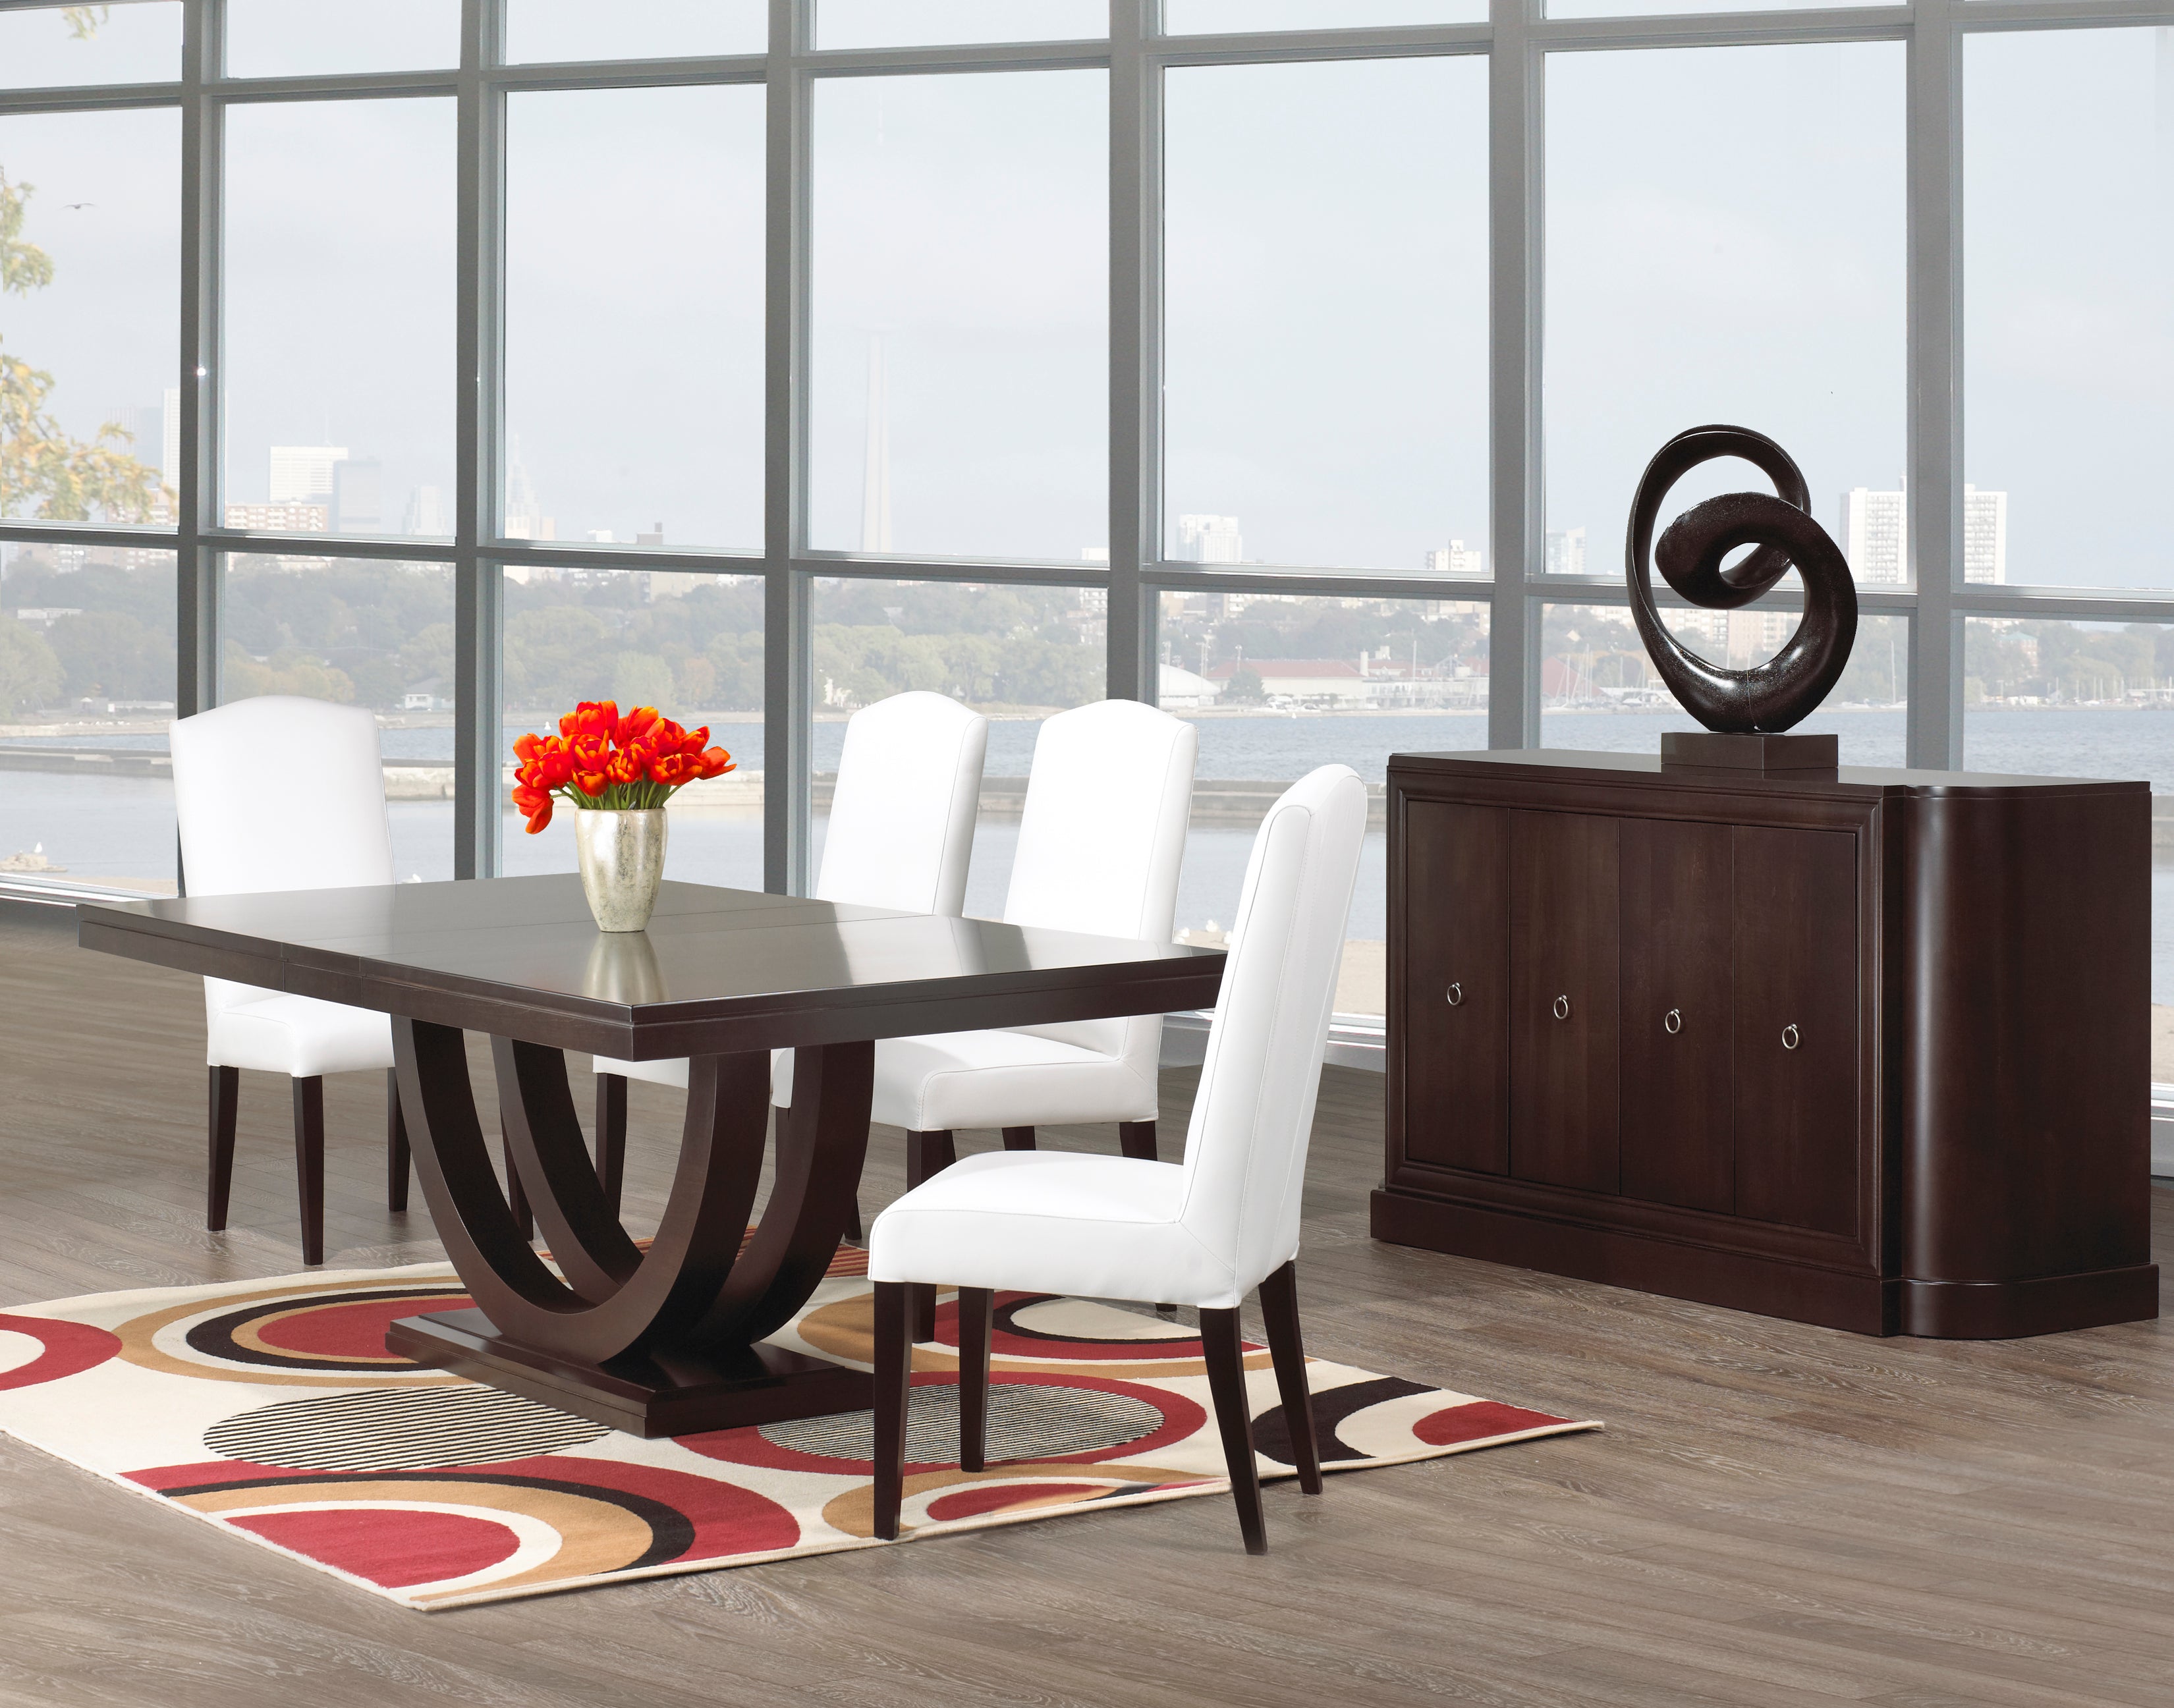 Chair as Shown | Cardinal Woodcraft Royal Canadian Dining Chair | Valley Ridge Furniture